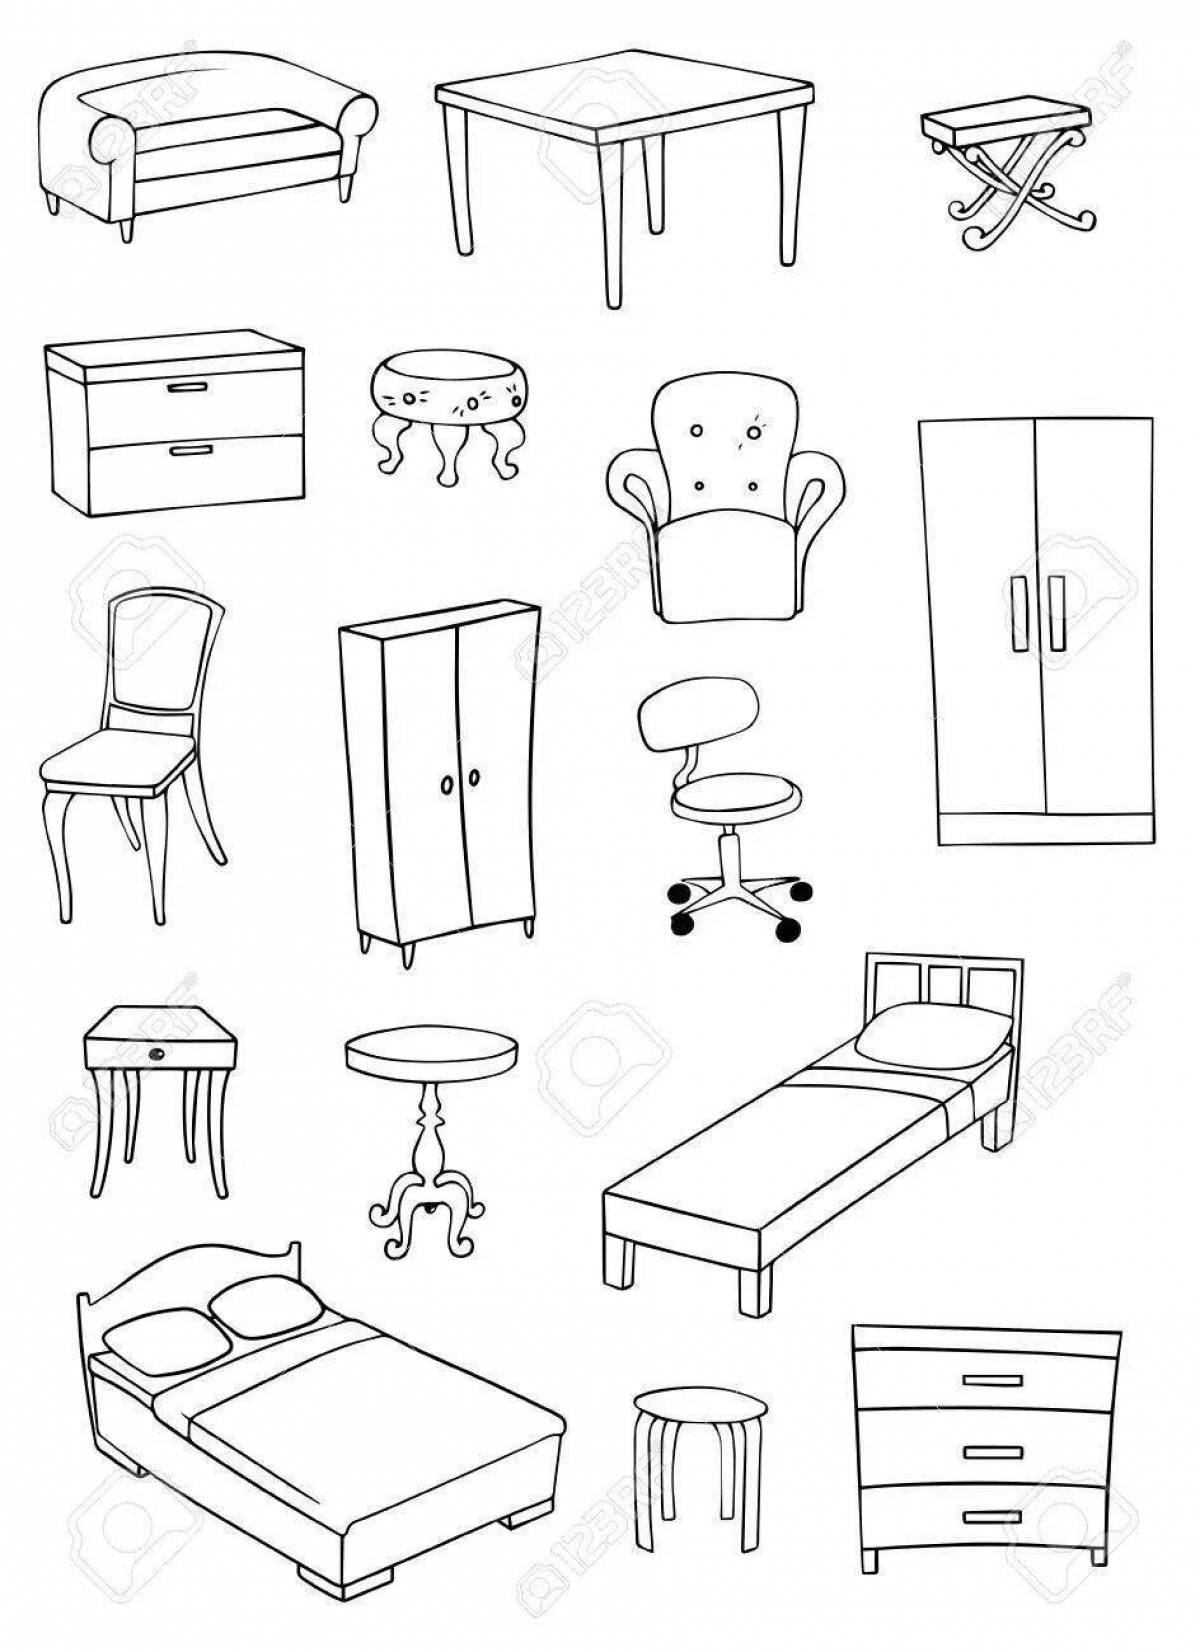 Adorable furniture coloring book for dolls